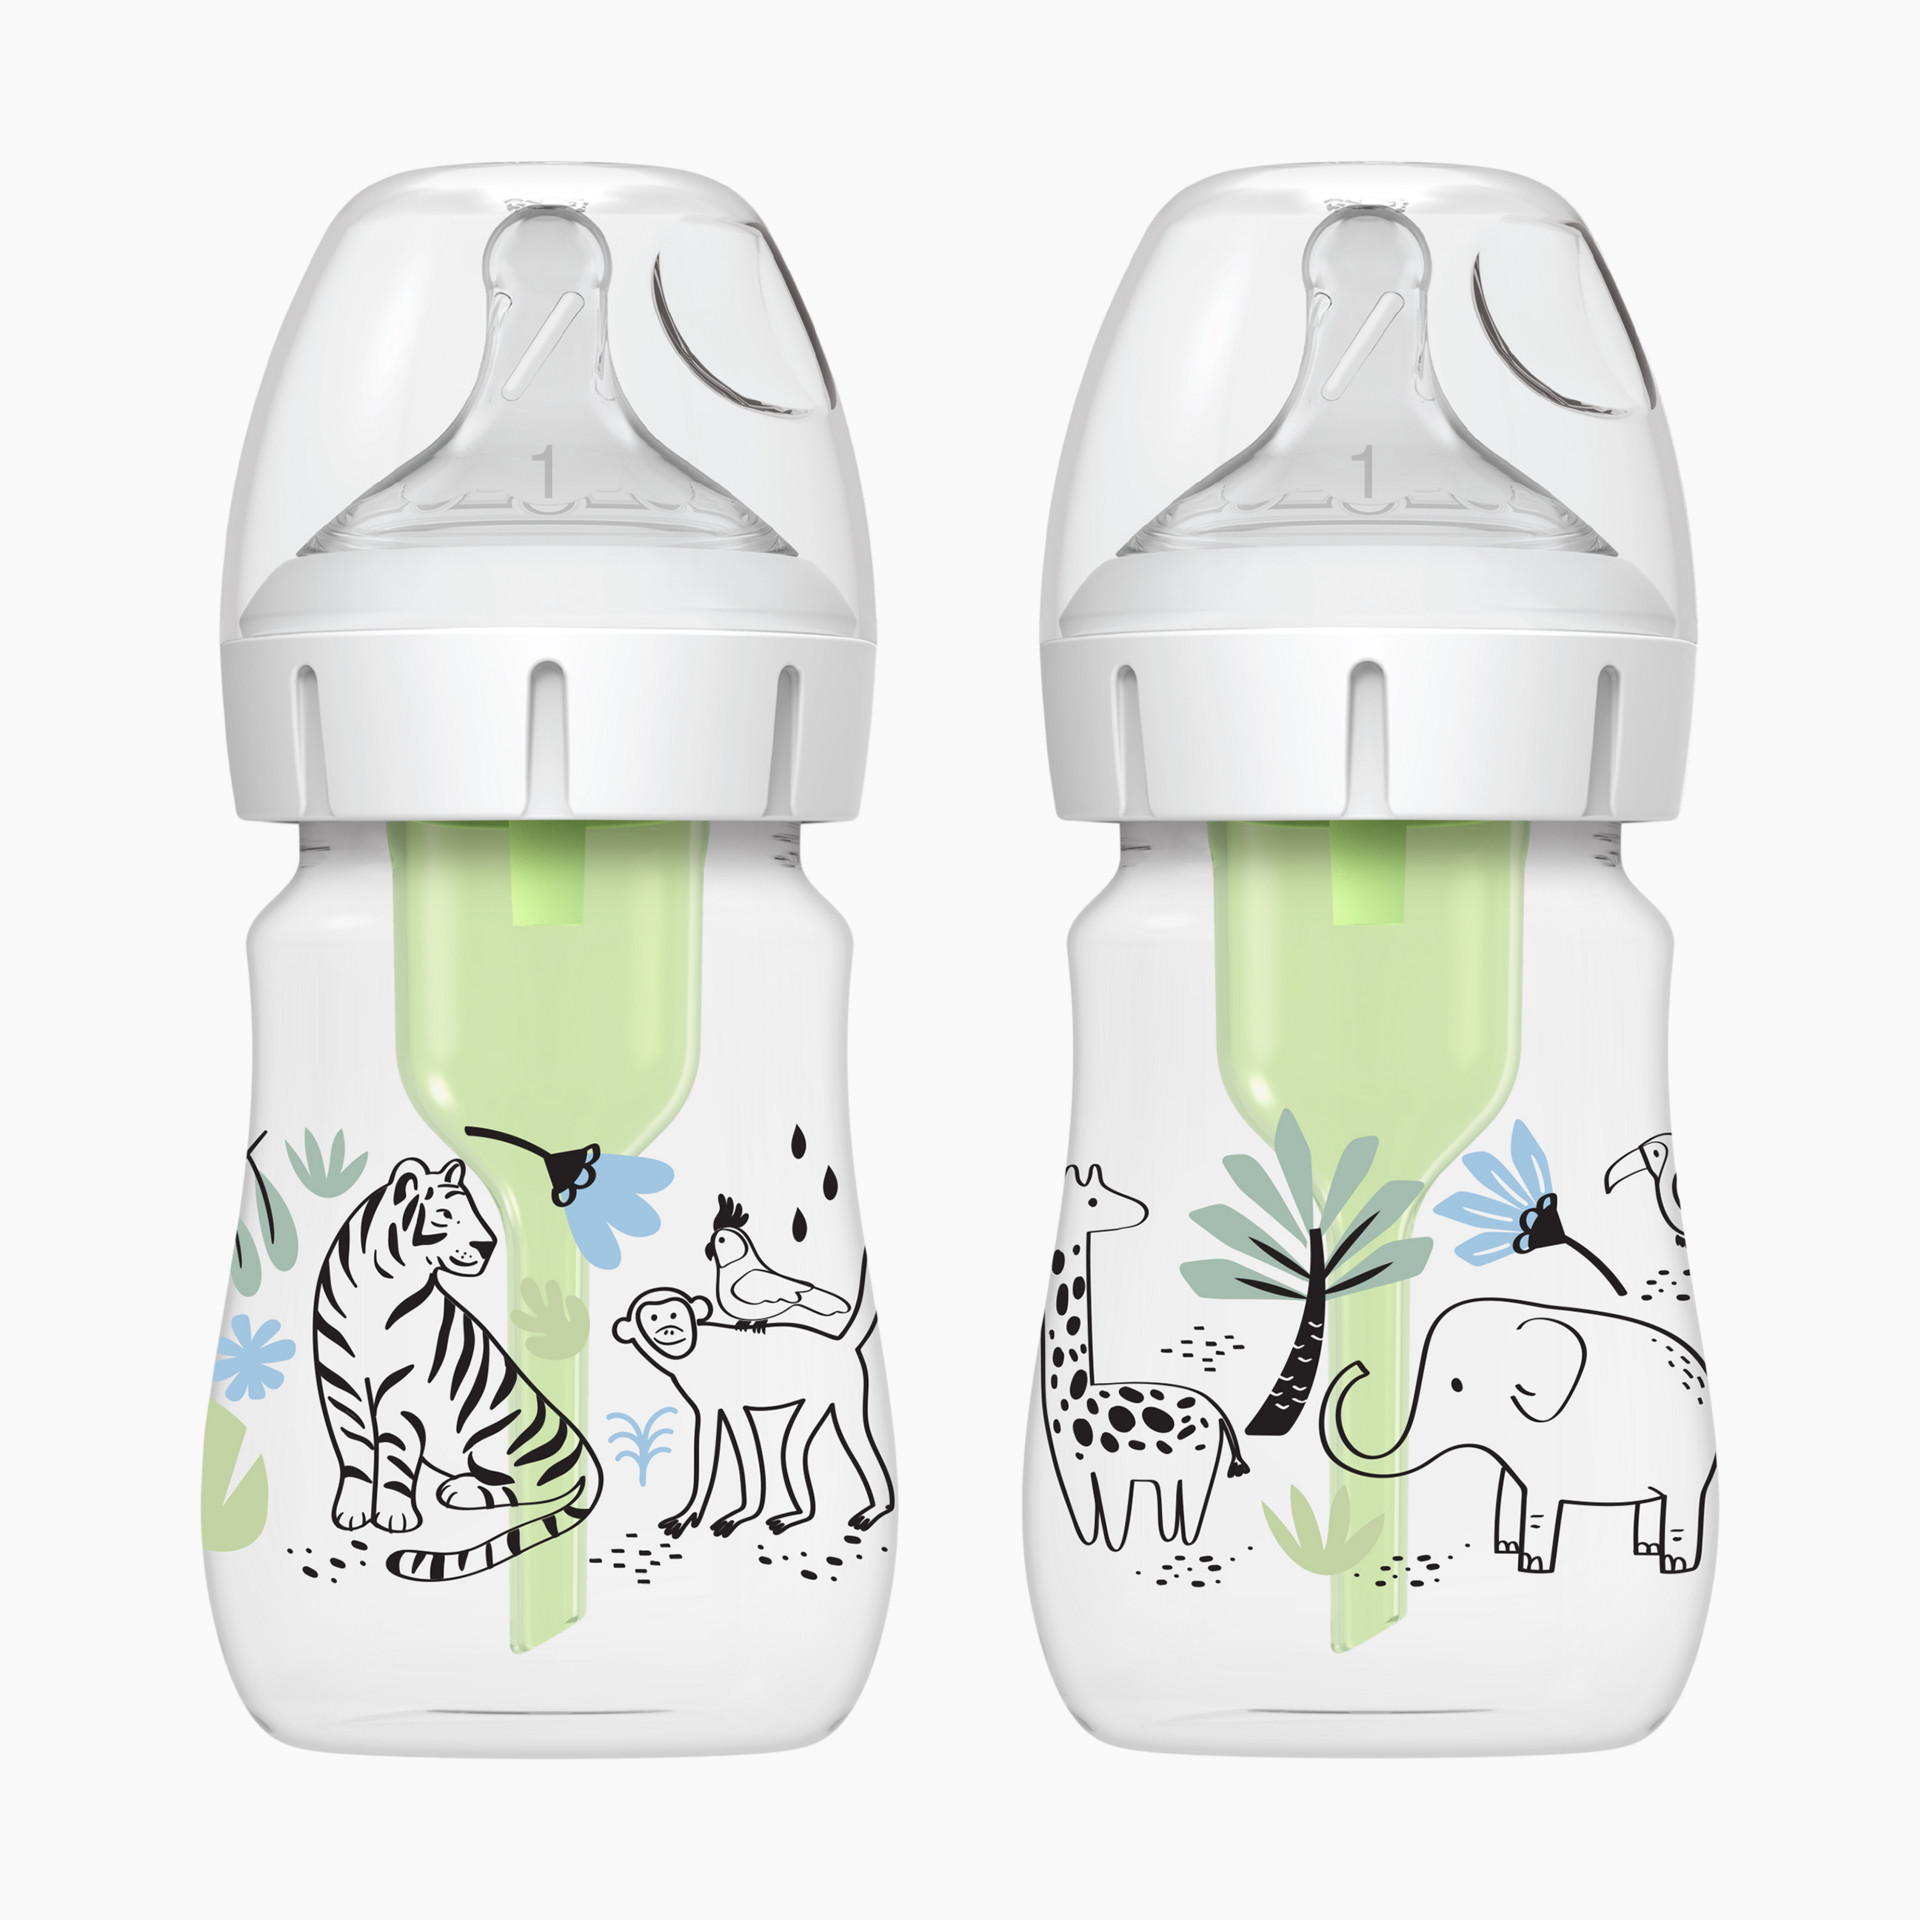 NUK First Essentials Bottles (3 Pack) - Moms on Call